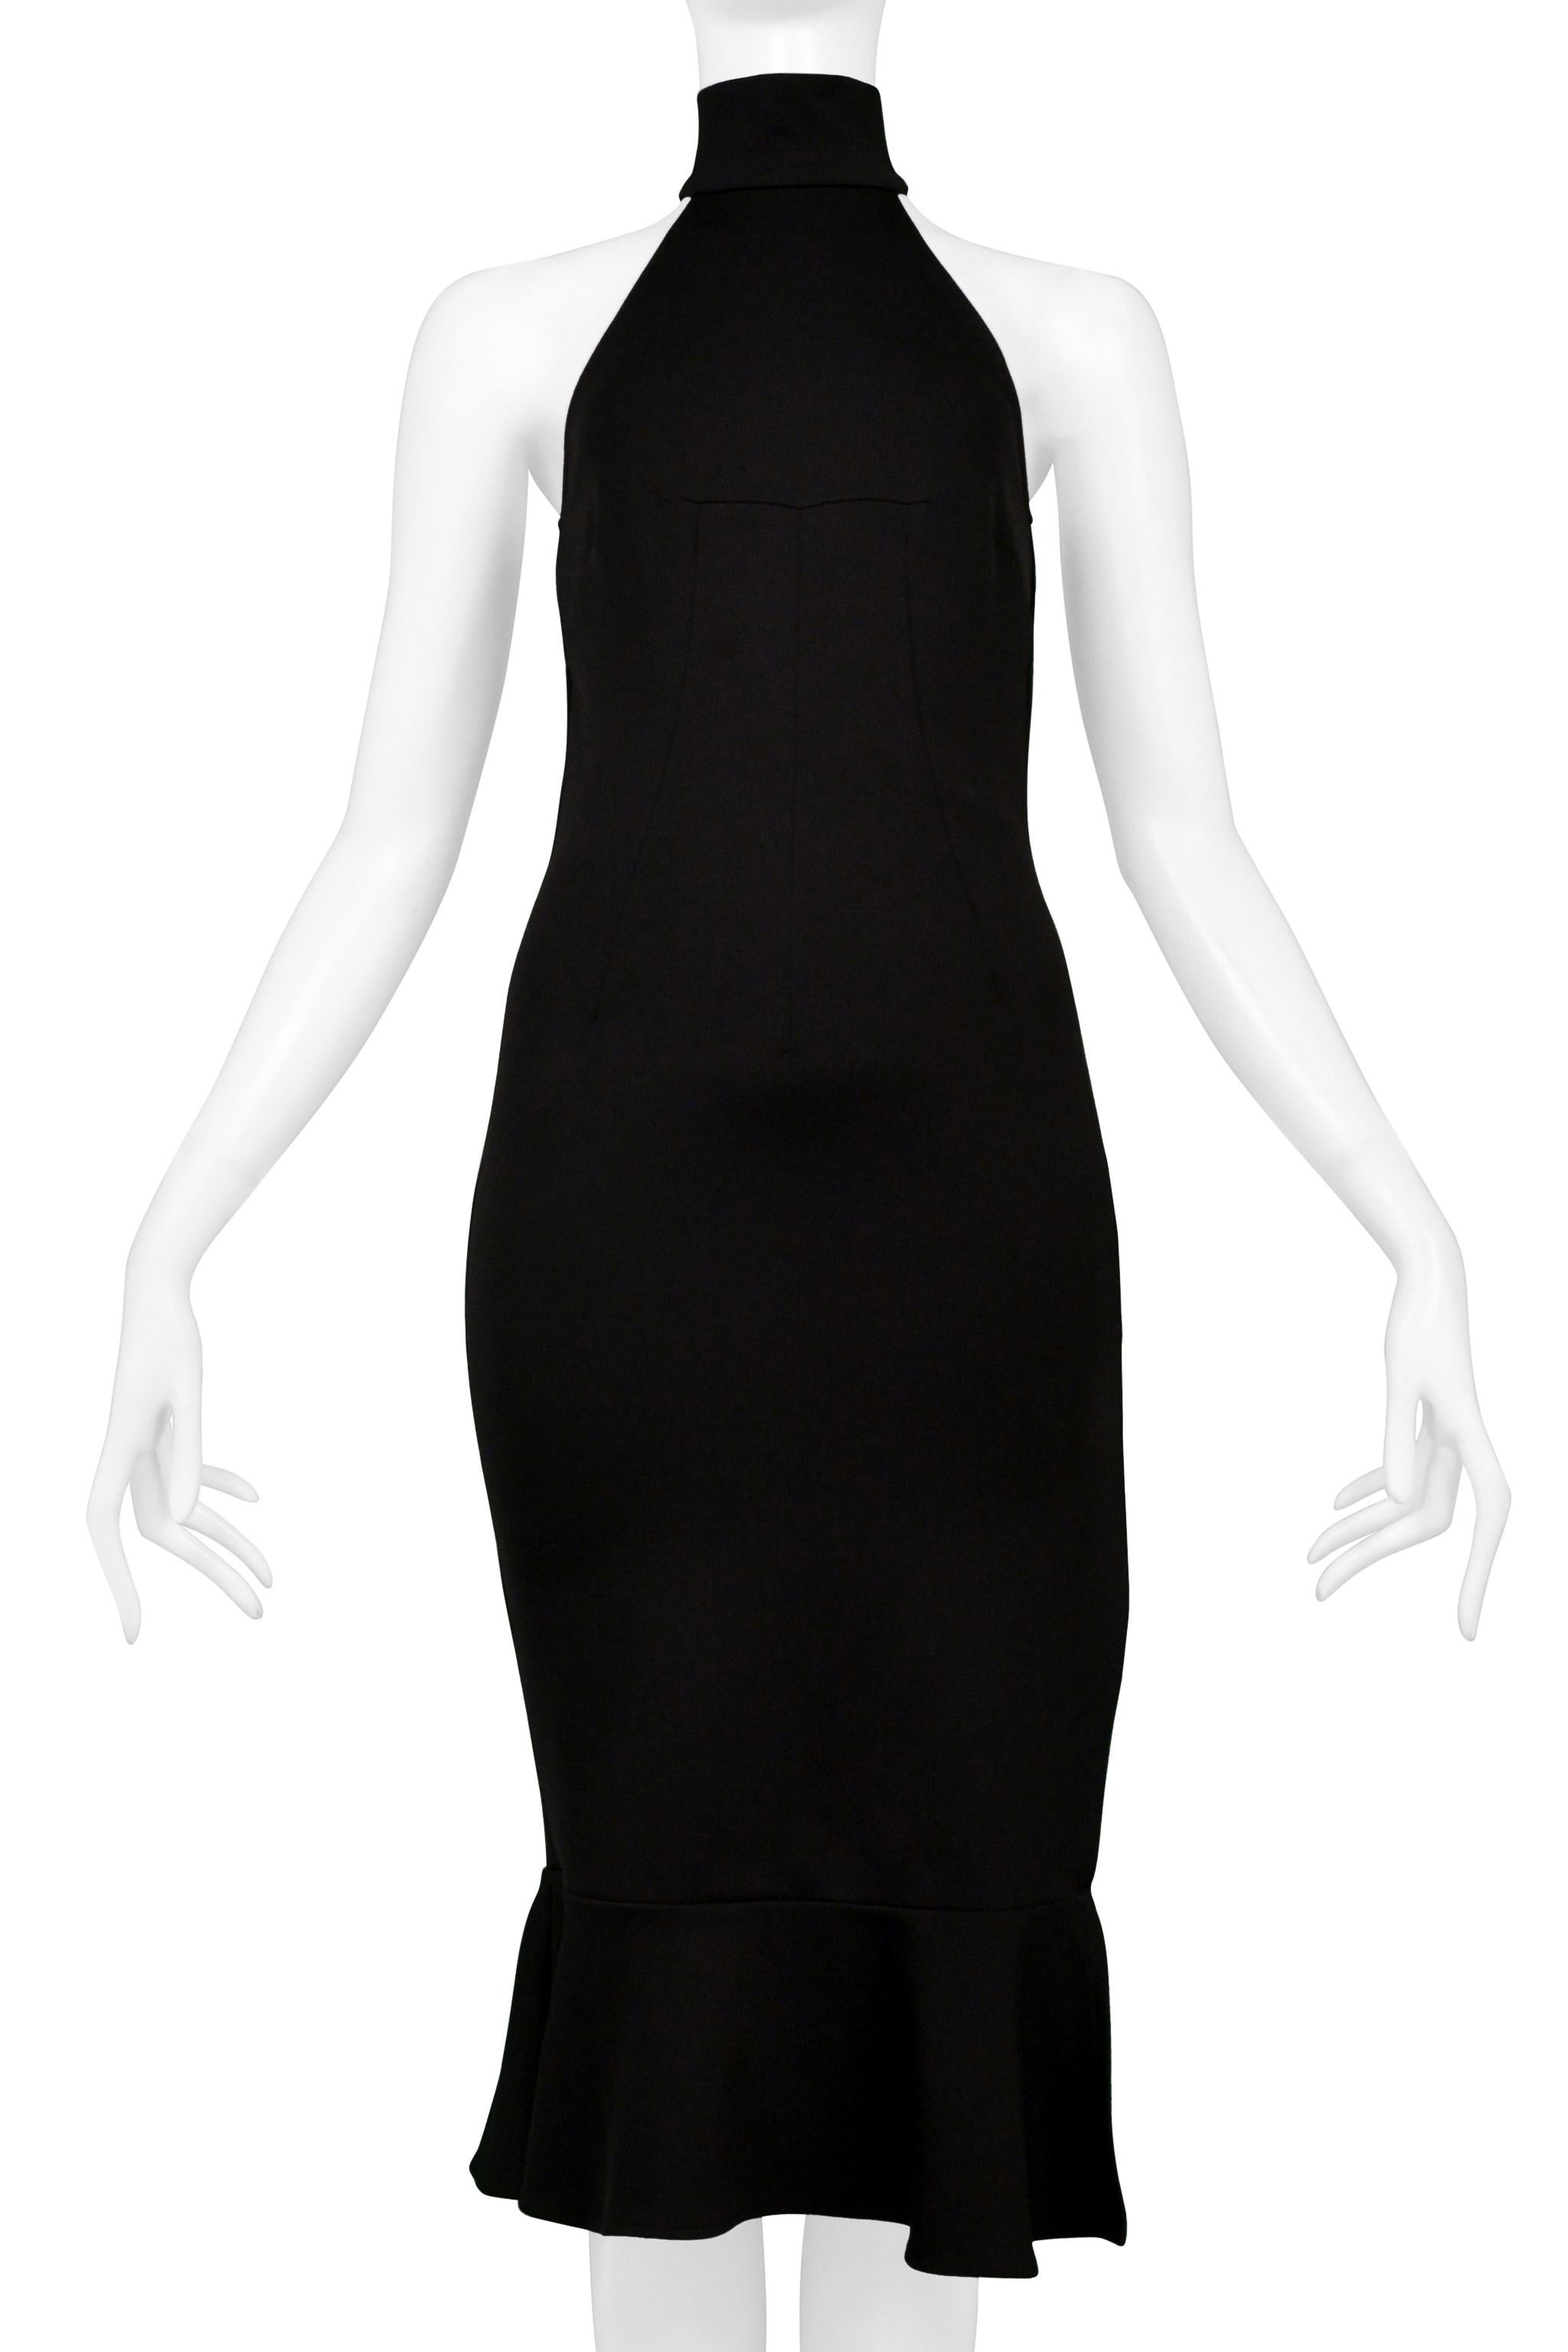 Docle & Gabbana Black High Neck Halter Dress In Excellent Condition For Sale In Los Angeles, CA